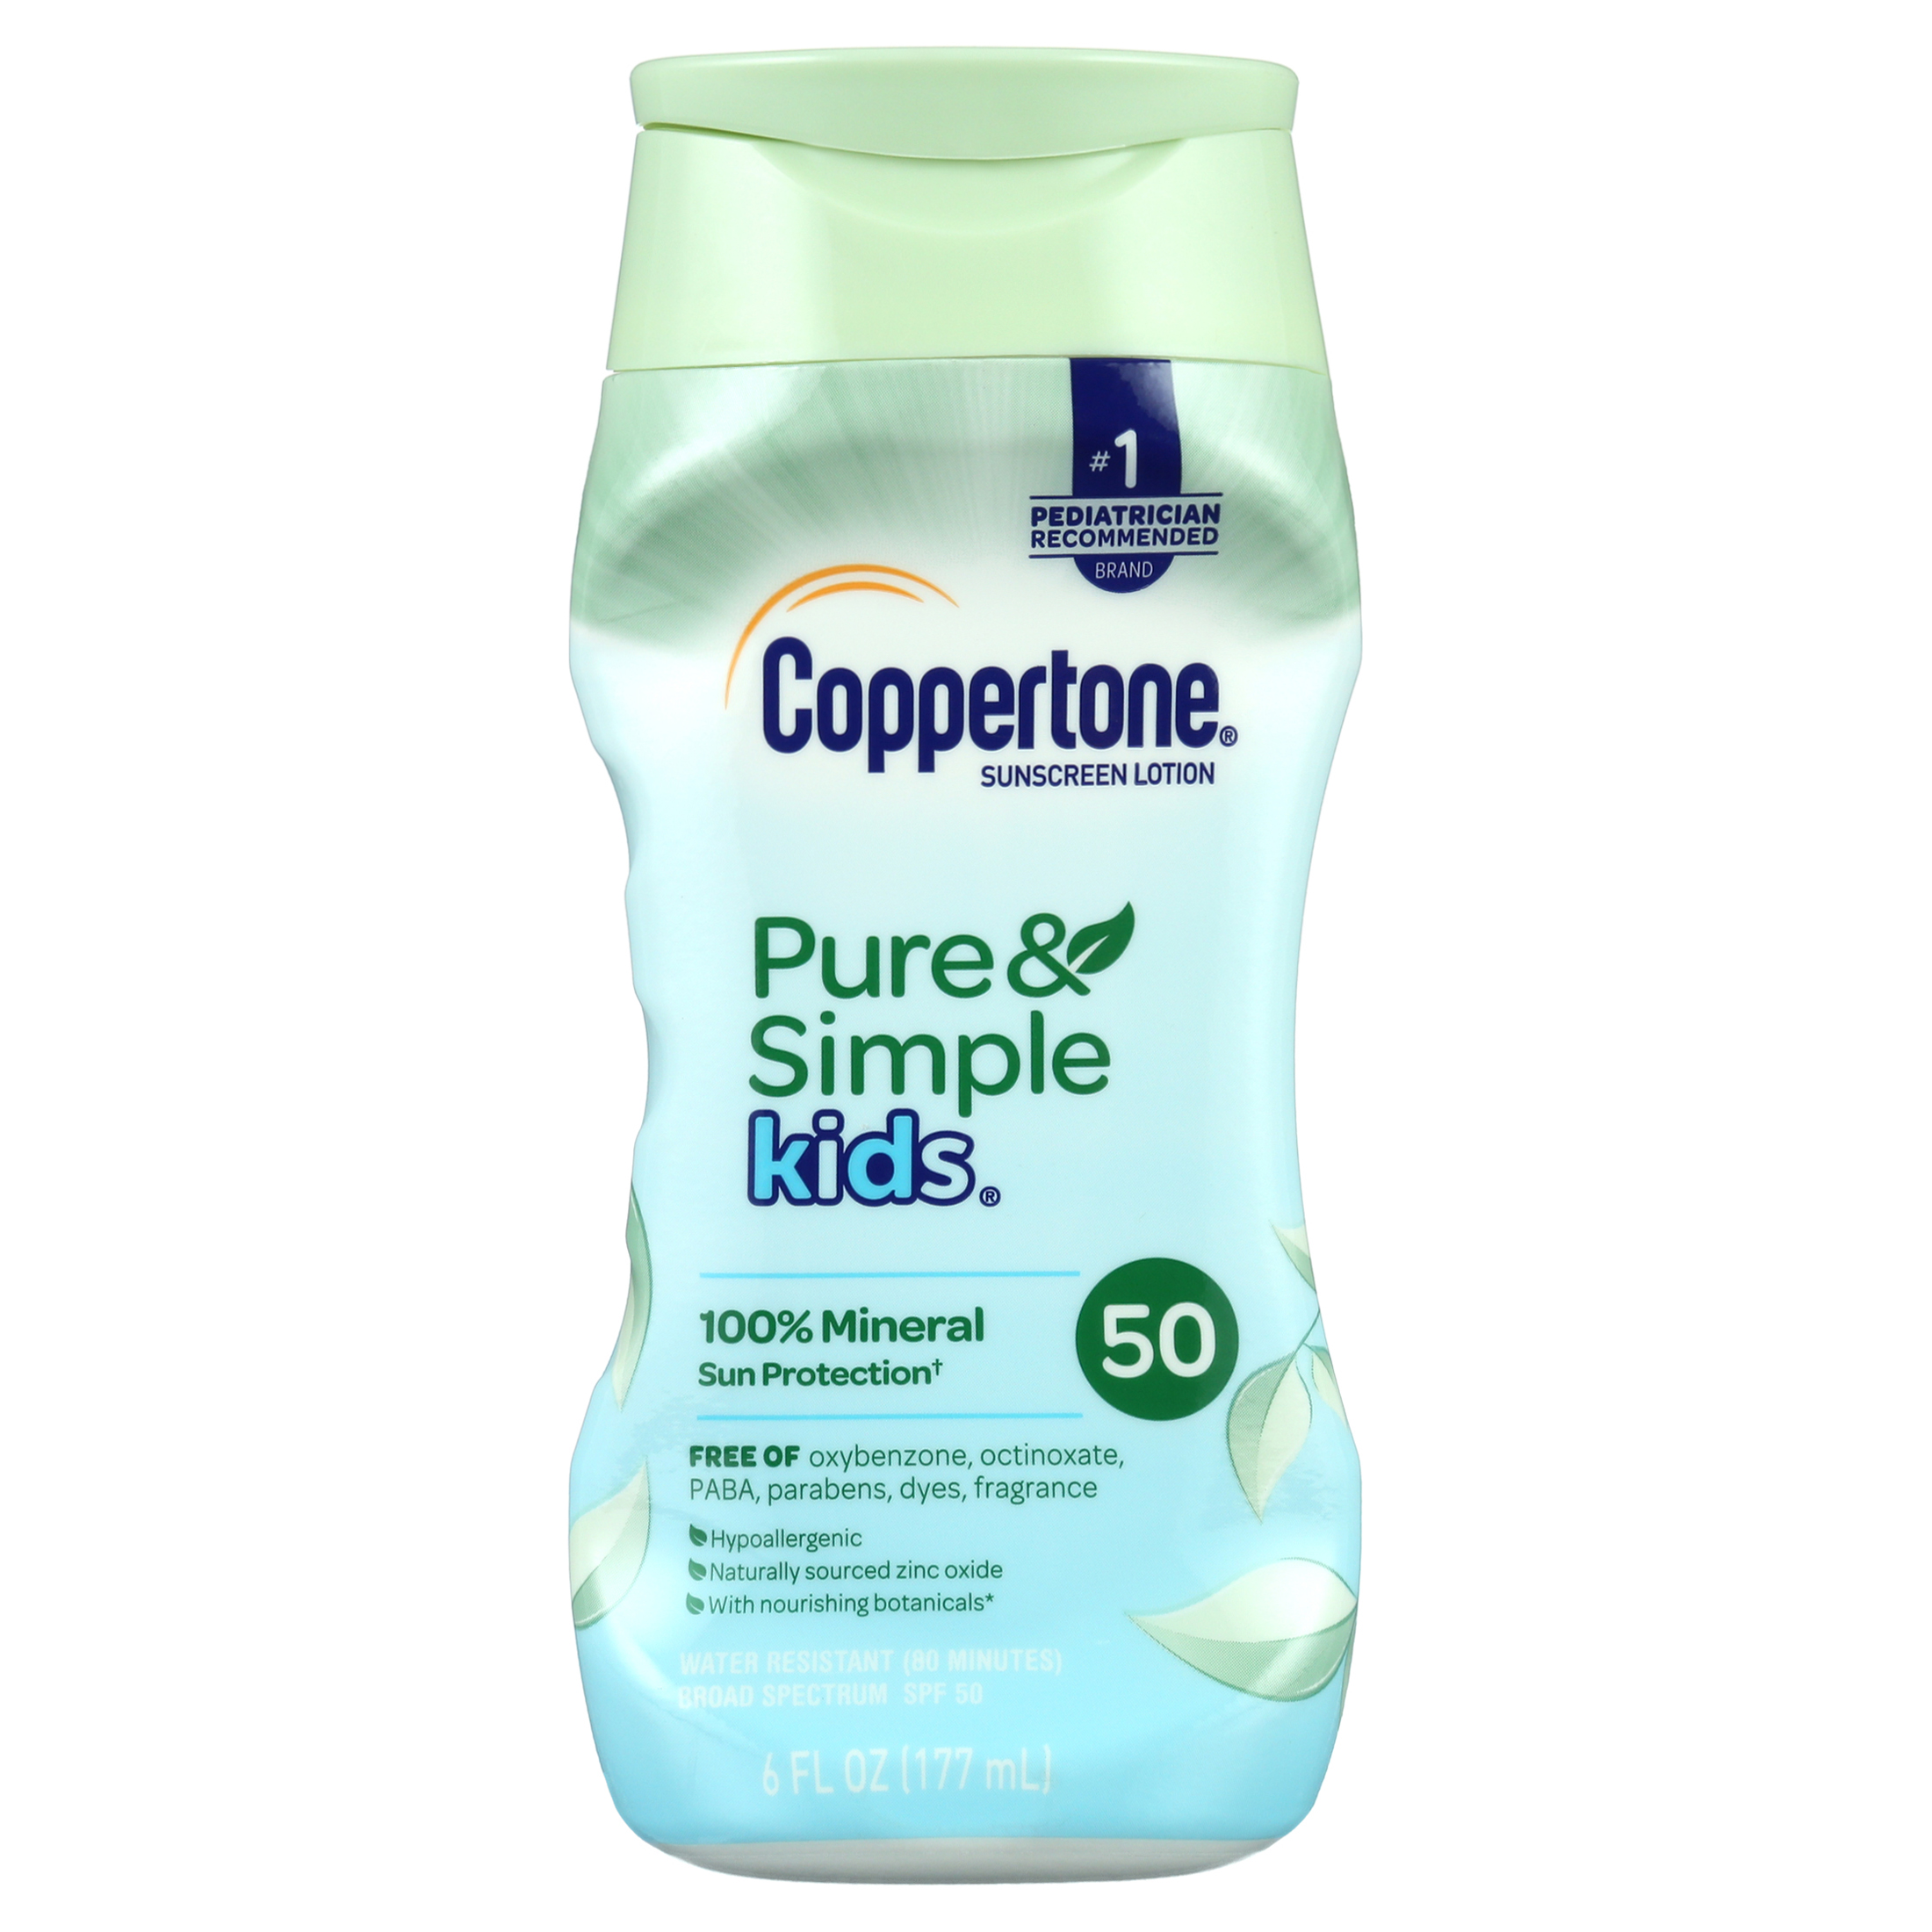 Coppertone Pure and Simple Kids Sunscreen Lotion, SPF 50, 6 Fl Oz - image 1 of 5